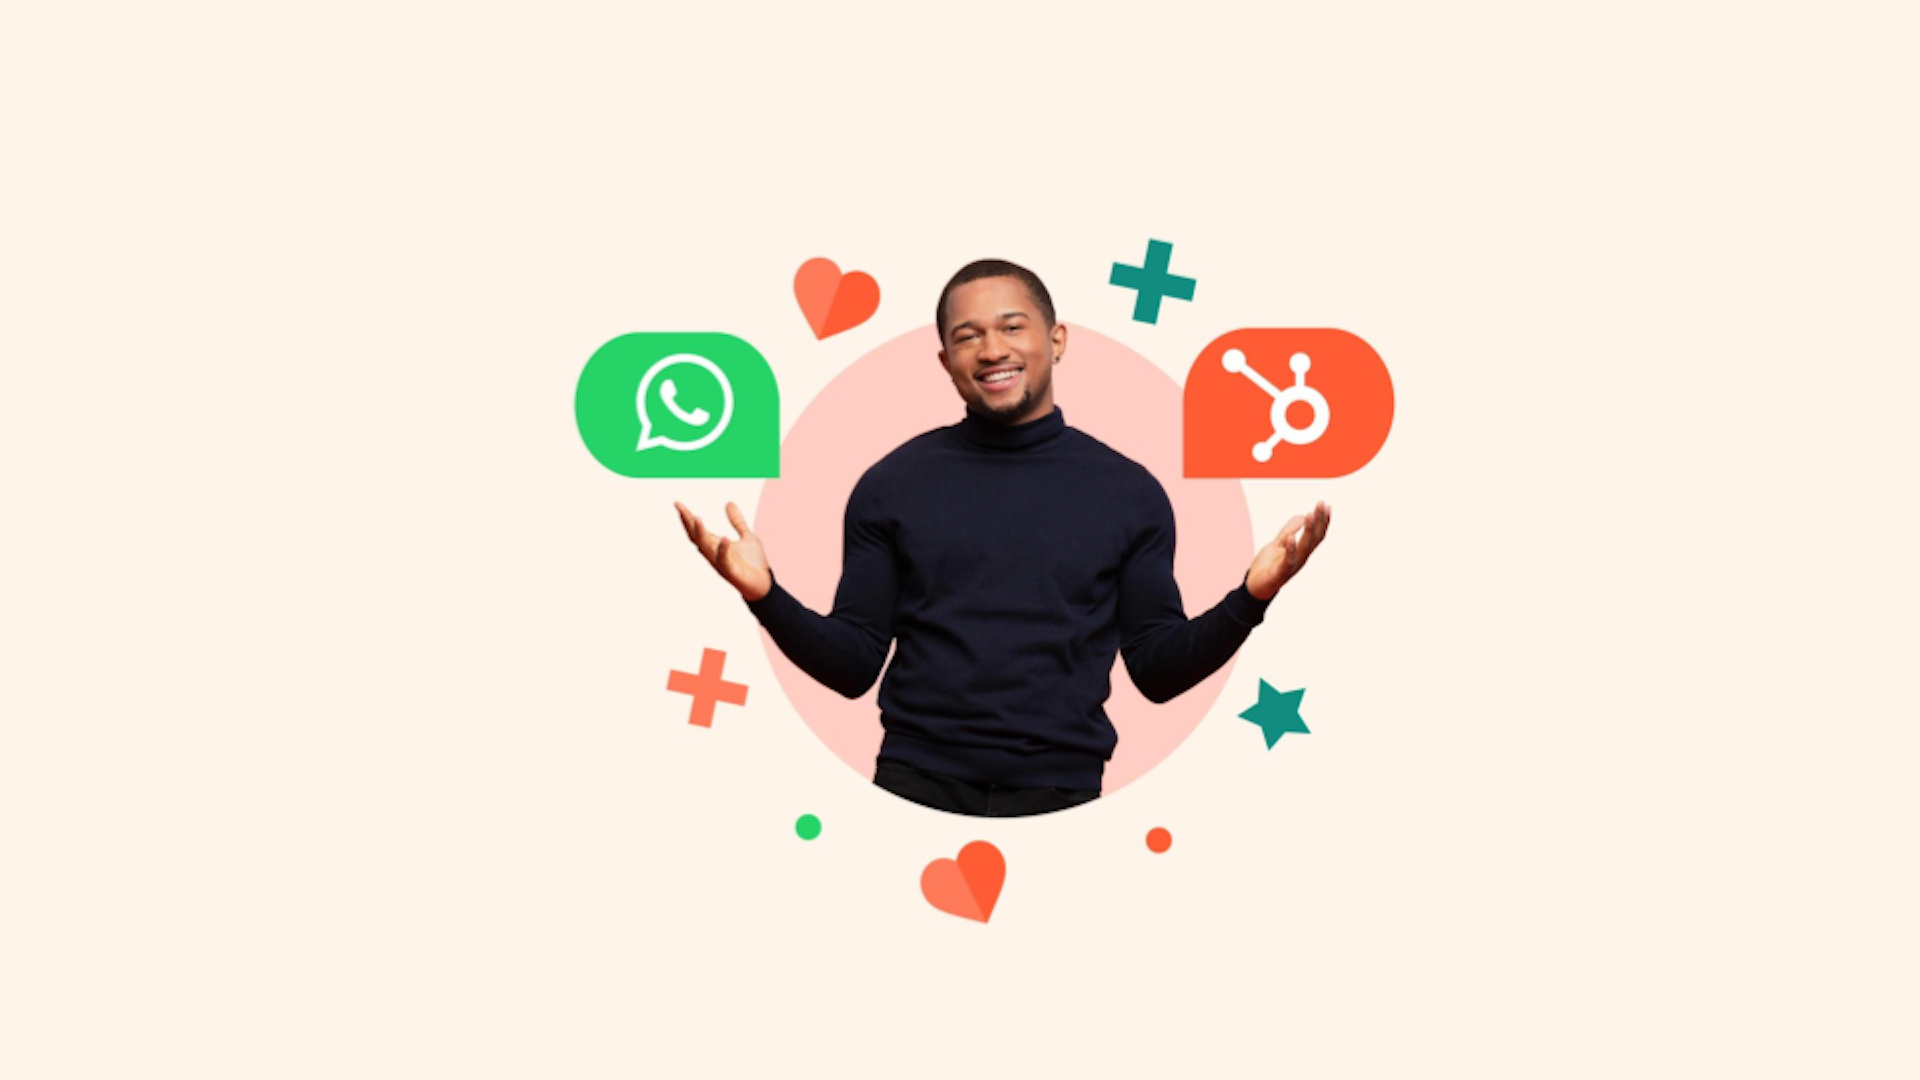 HubSpot Announces General Availability of WhatsApp Integration to Help Customers Form Deep Connections